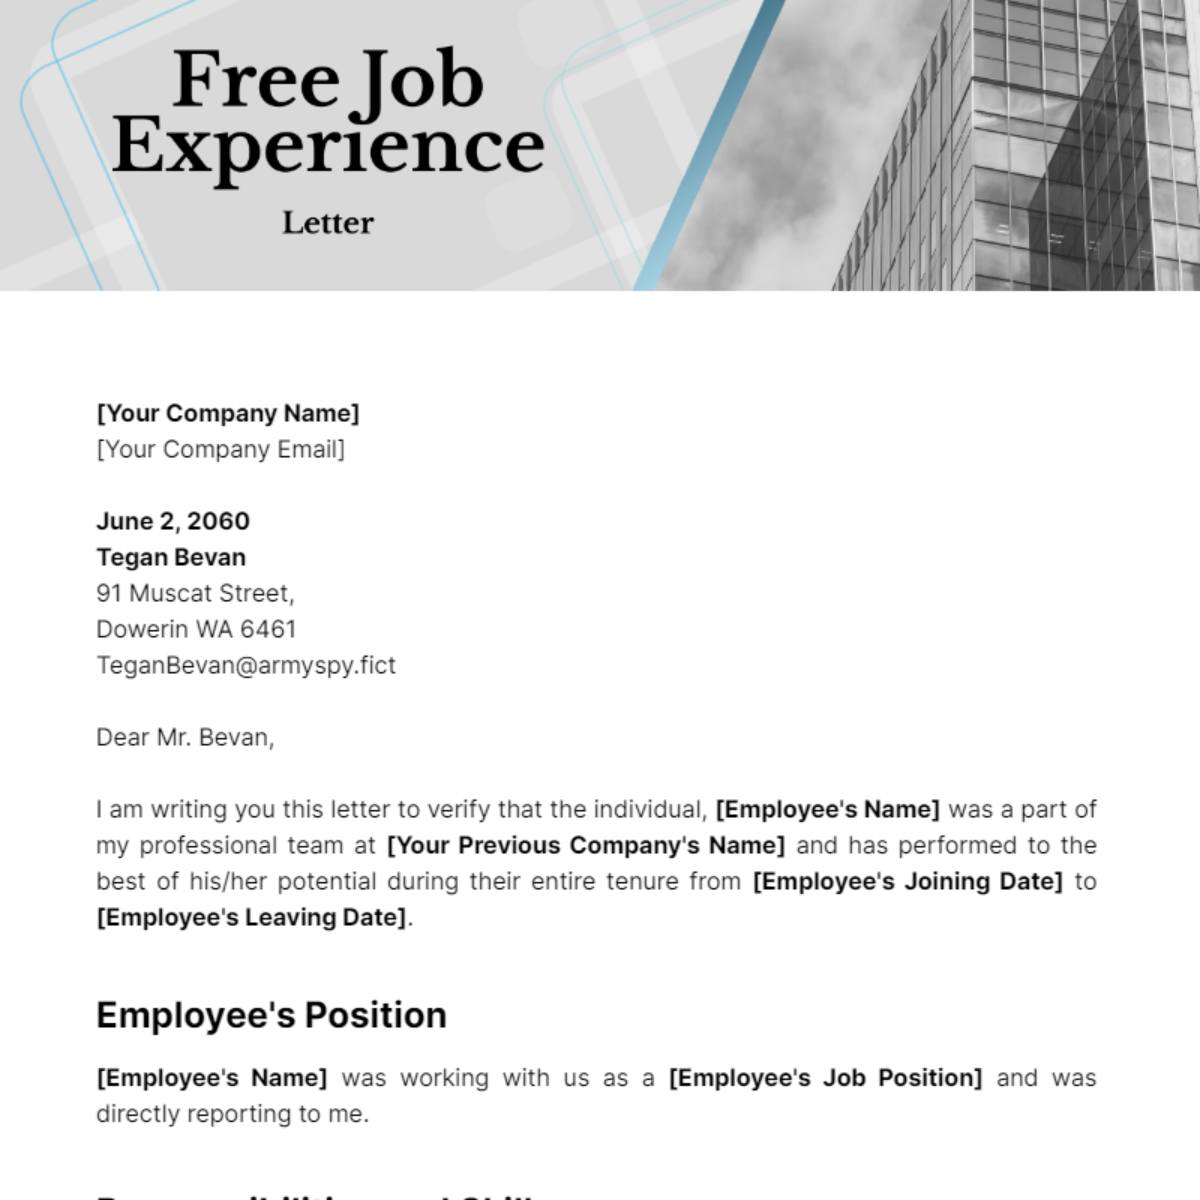 Job Experience Letter Template